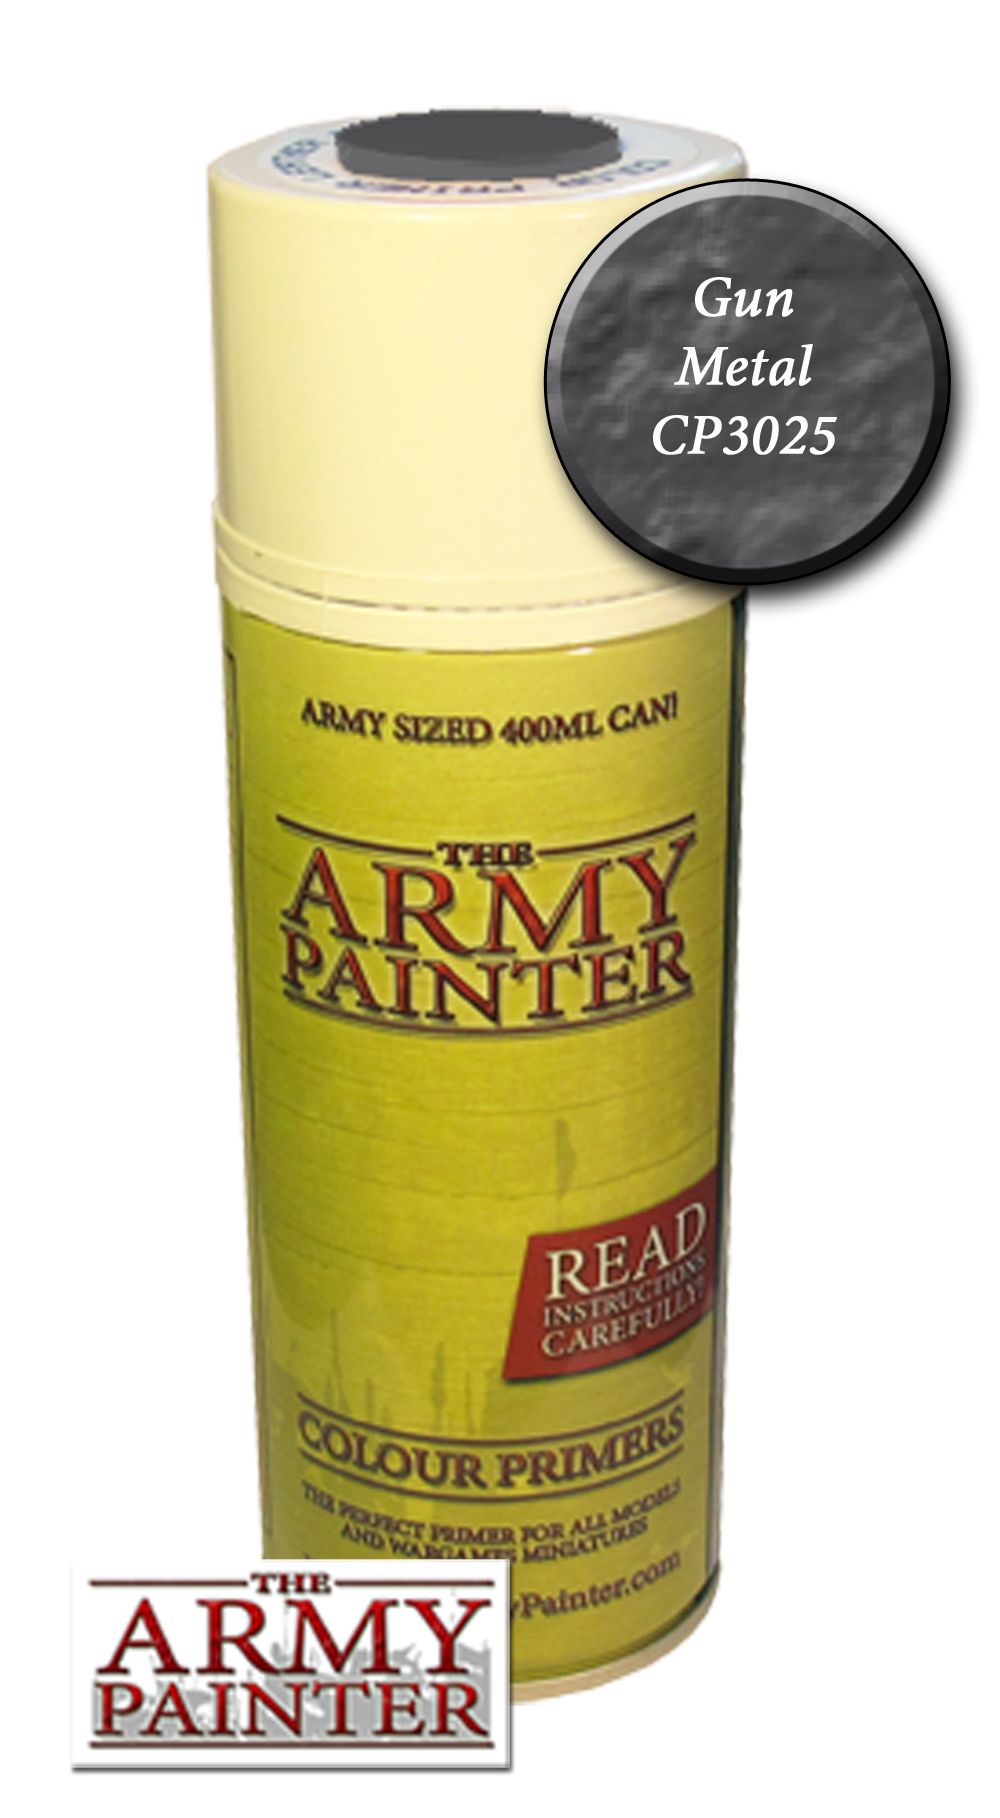 The Army Painter - Colour Primer: Spray Paint, 400ml - All Colors